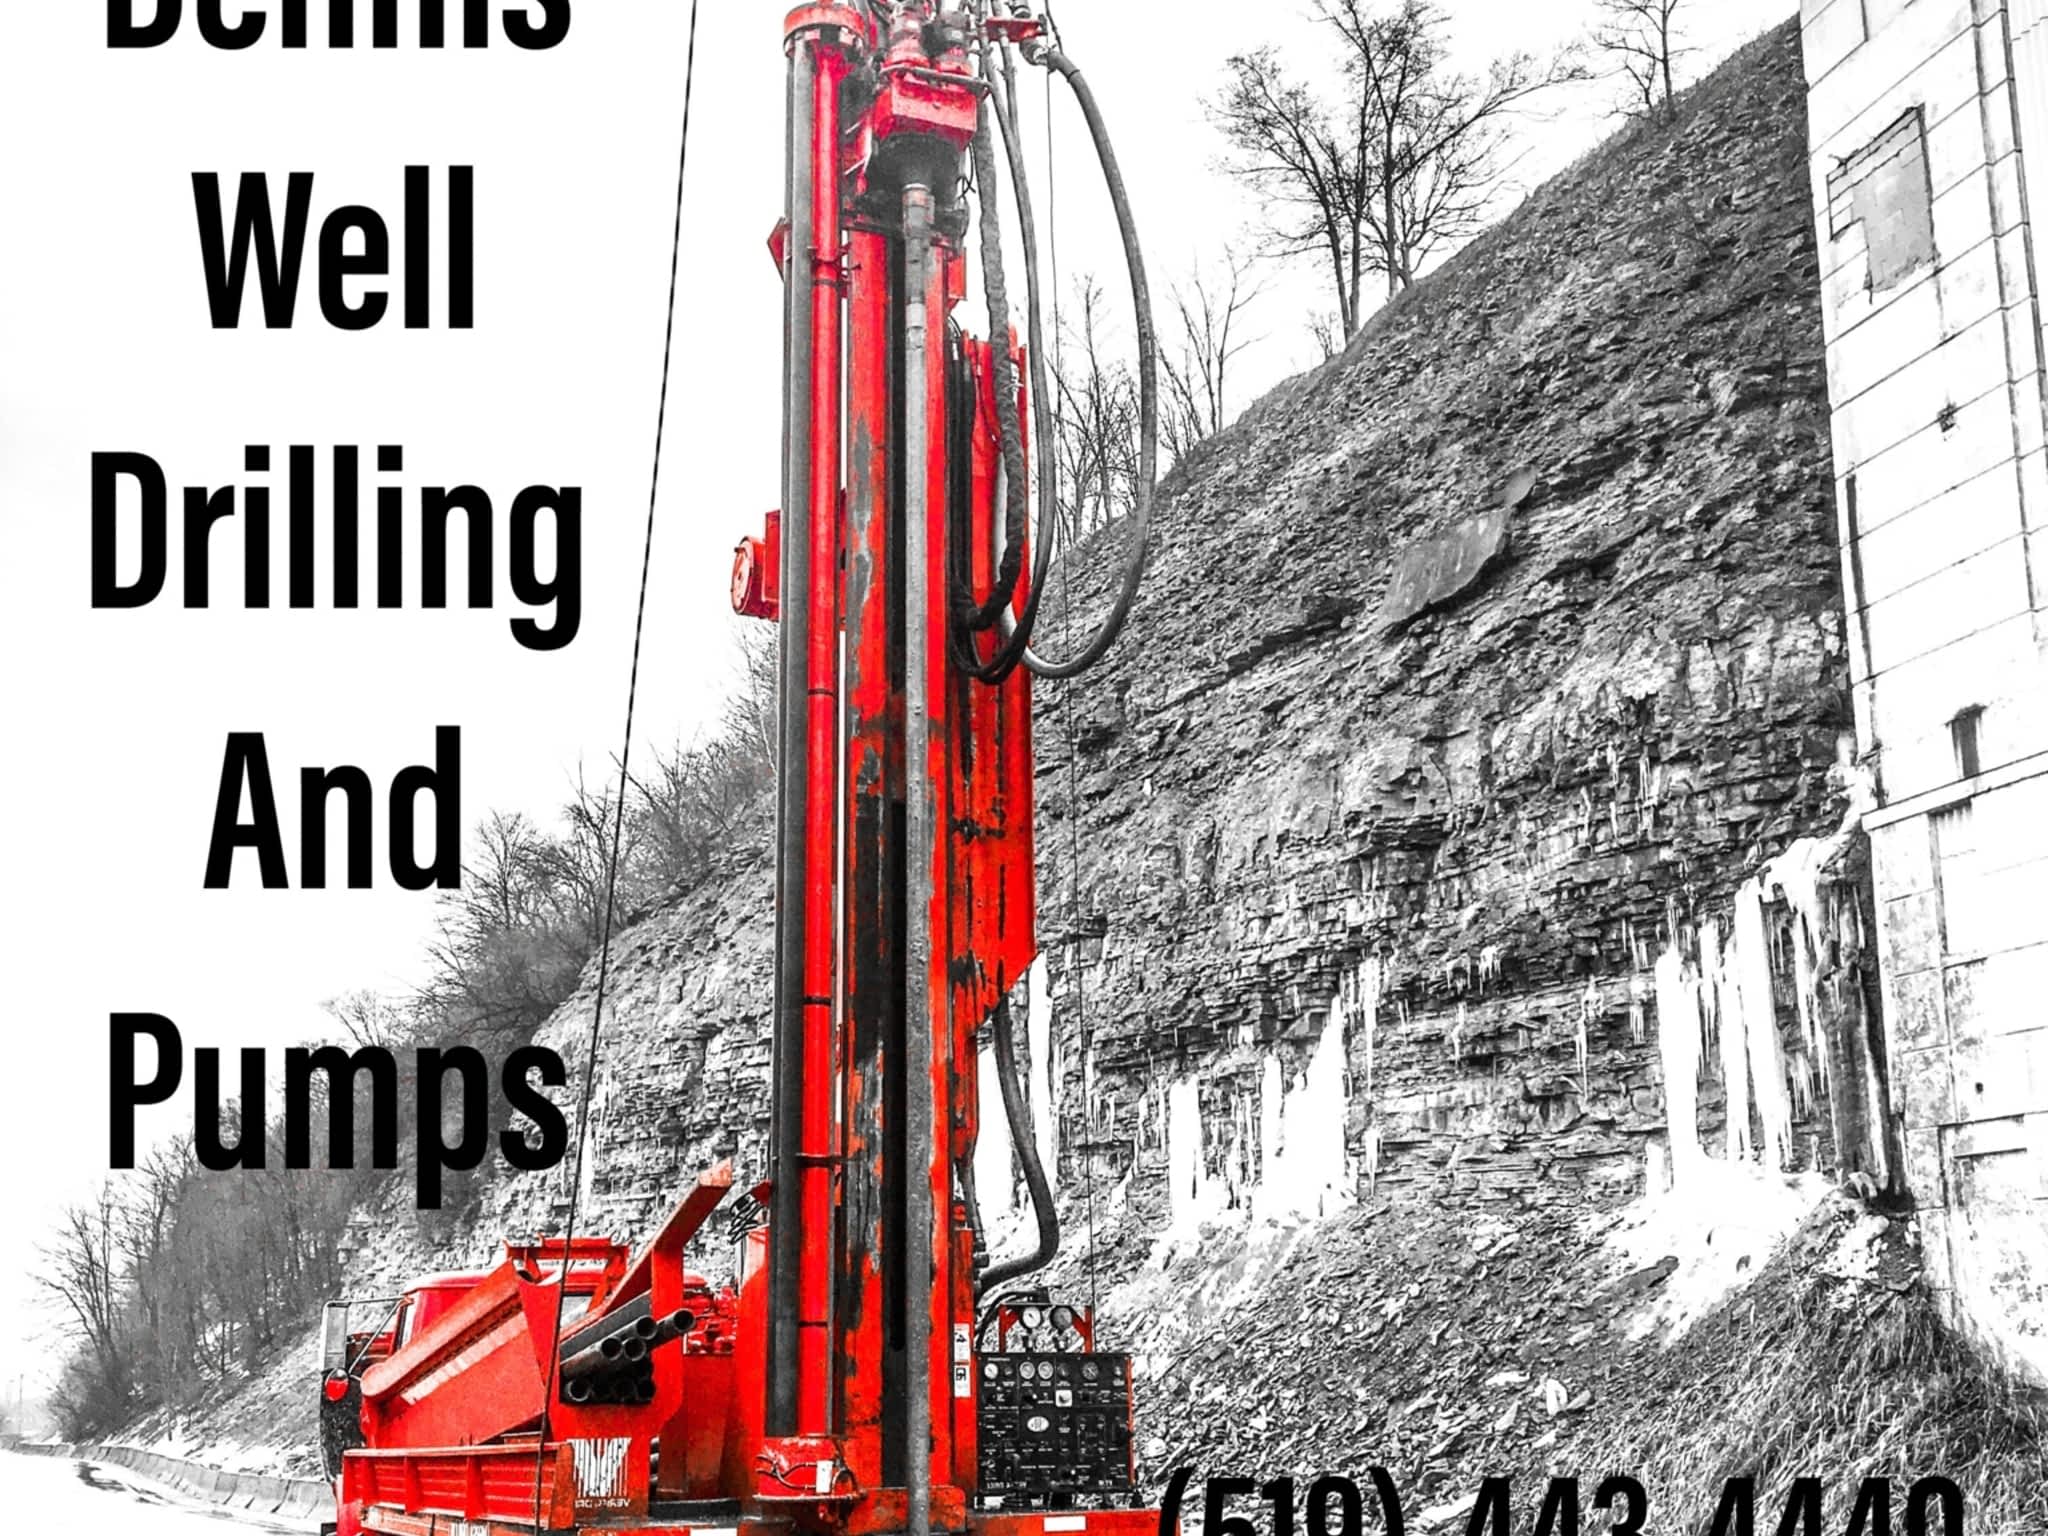 photo Dennis Robert Well Drilling And Pumps